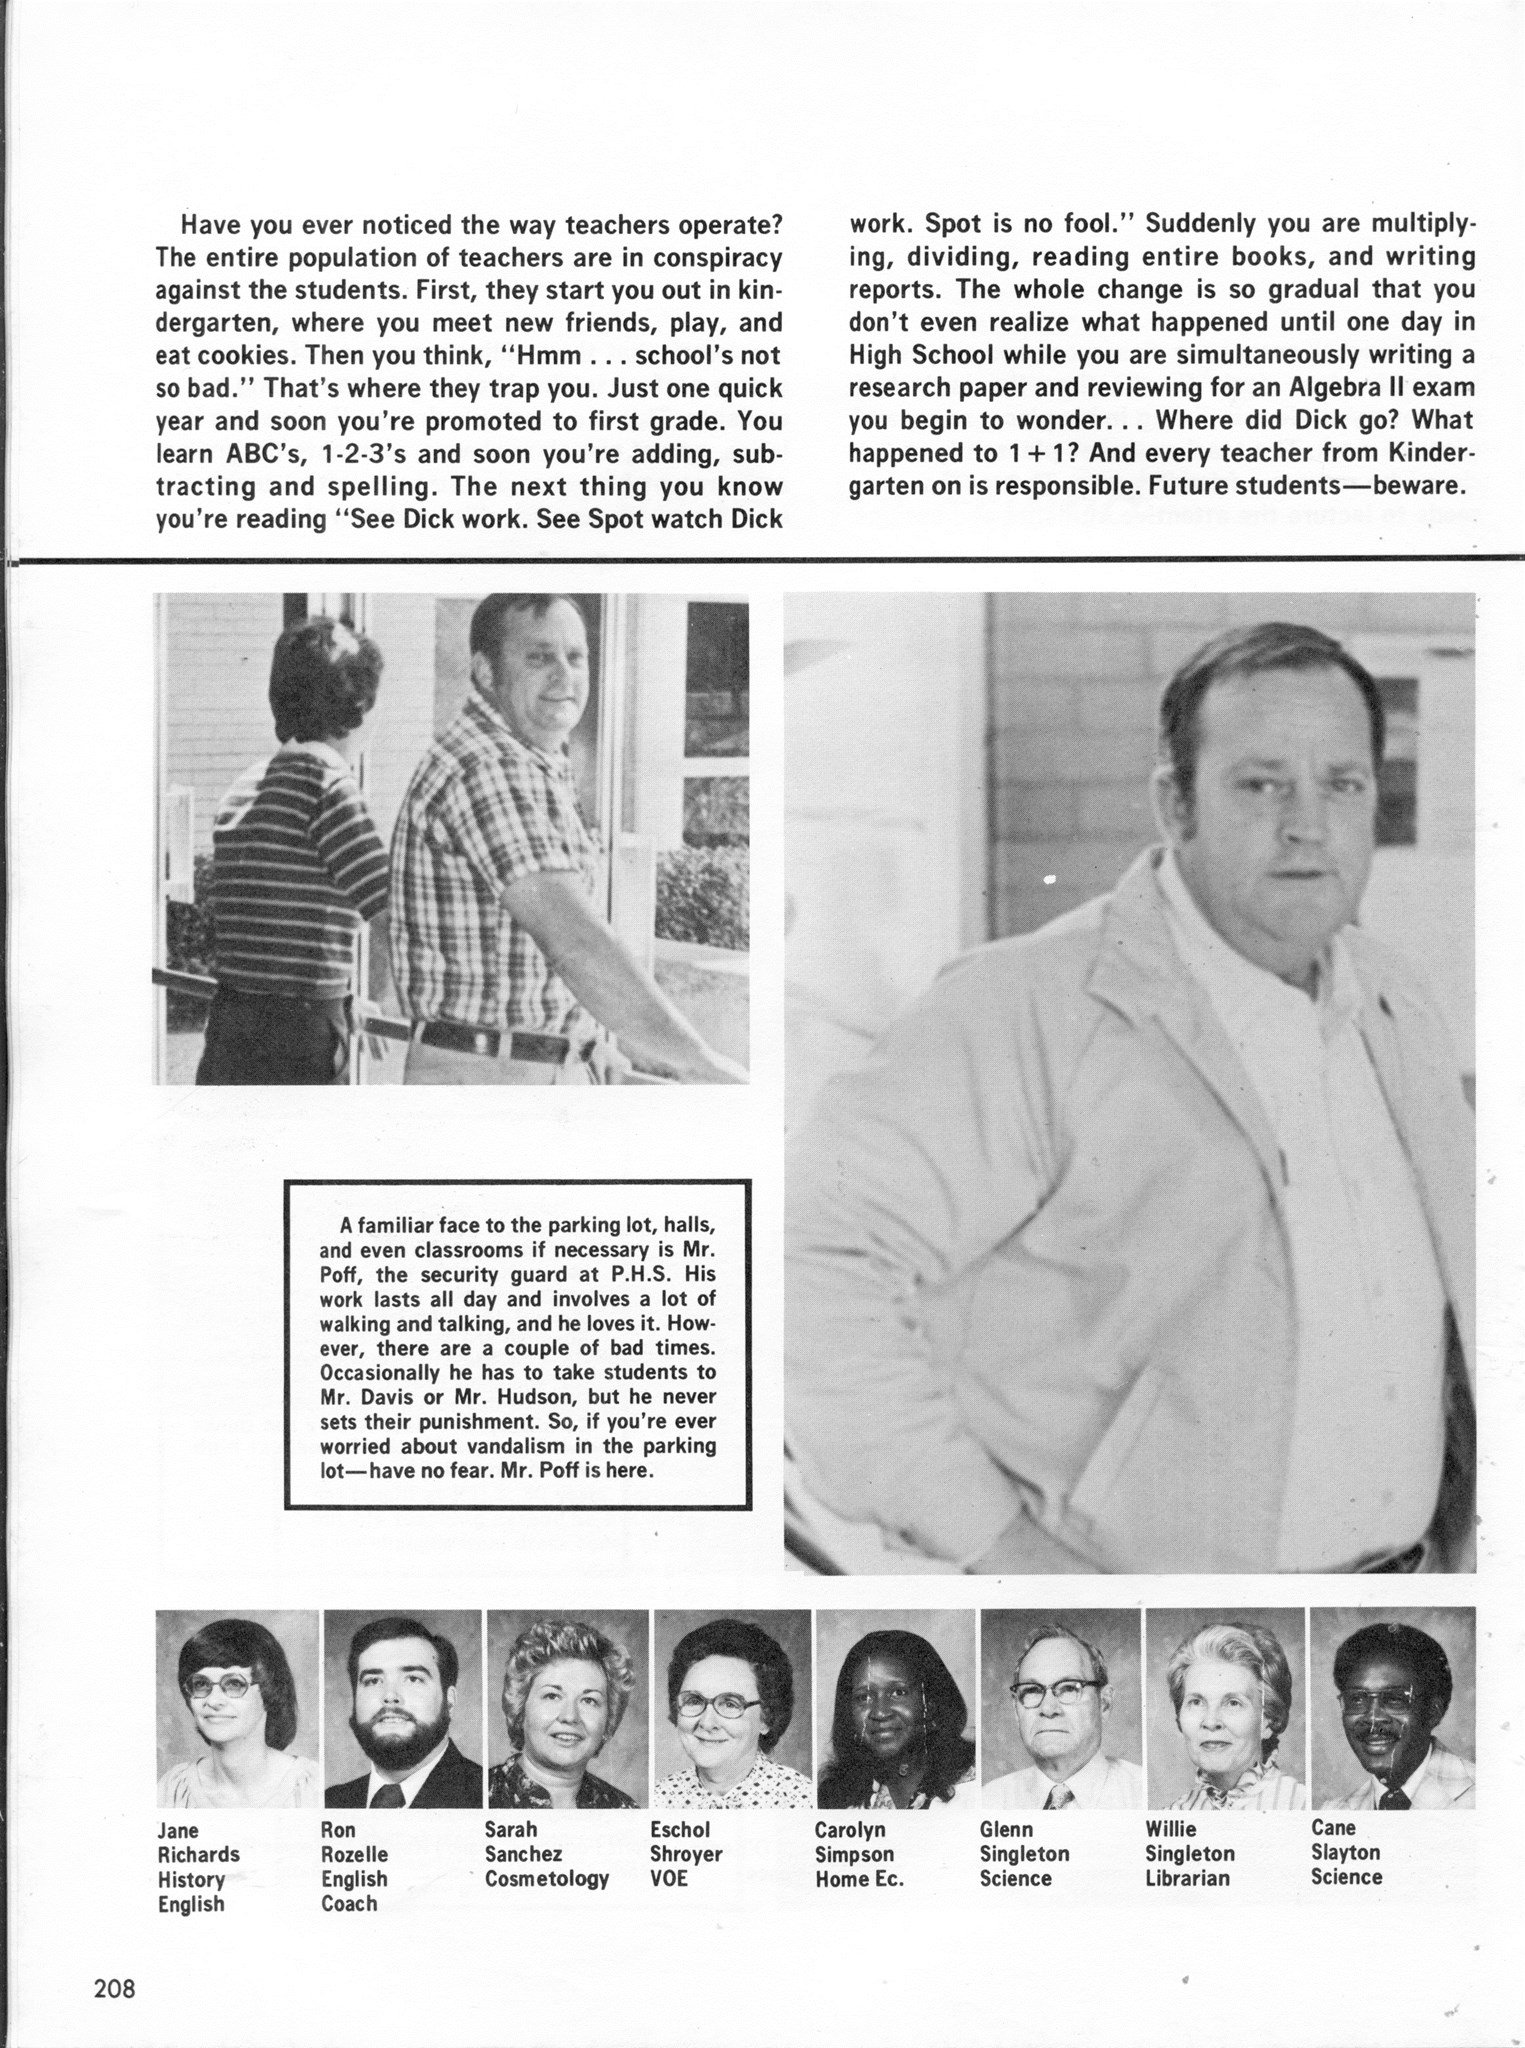 ../../../Images/Large/1980/Arclight-1980-pg0208.jpg